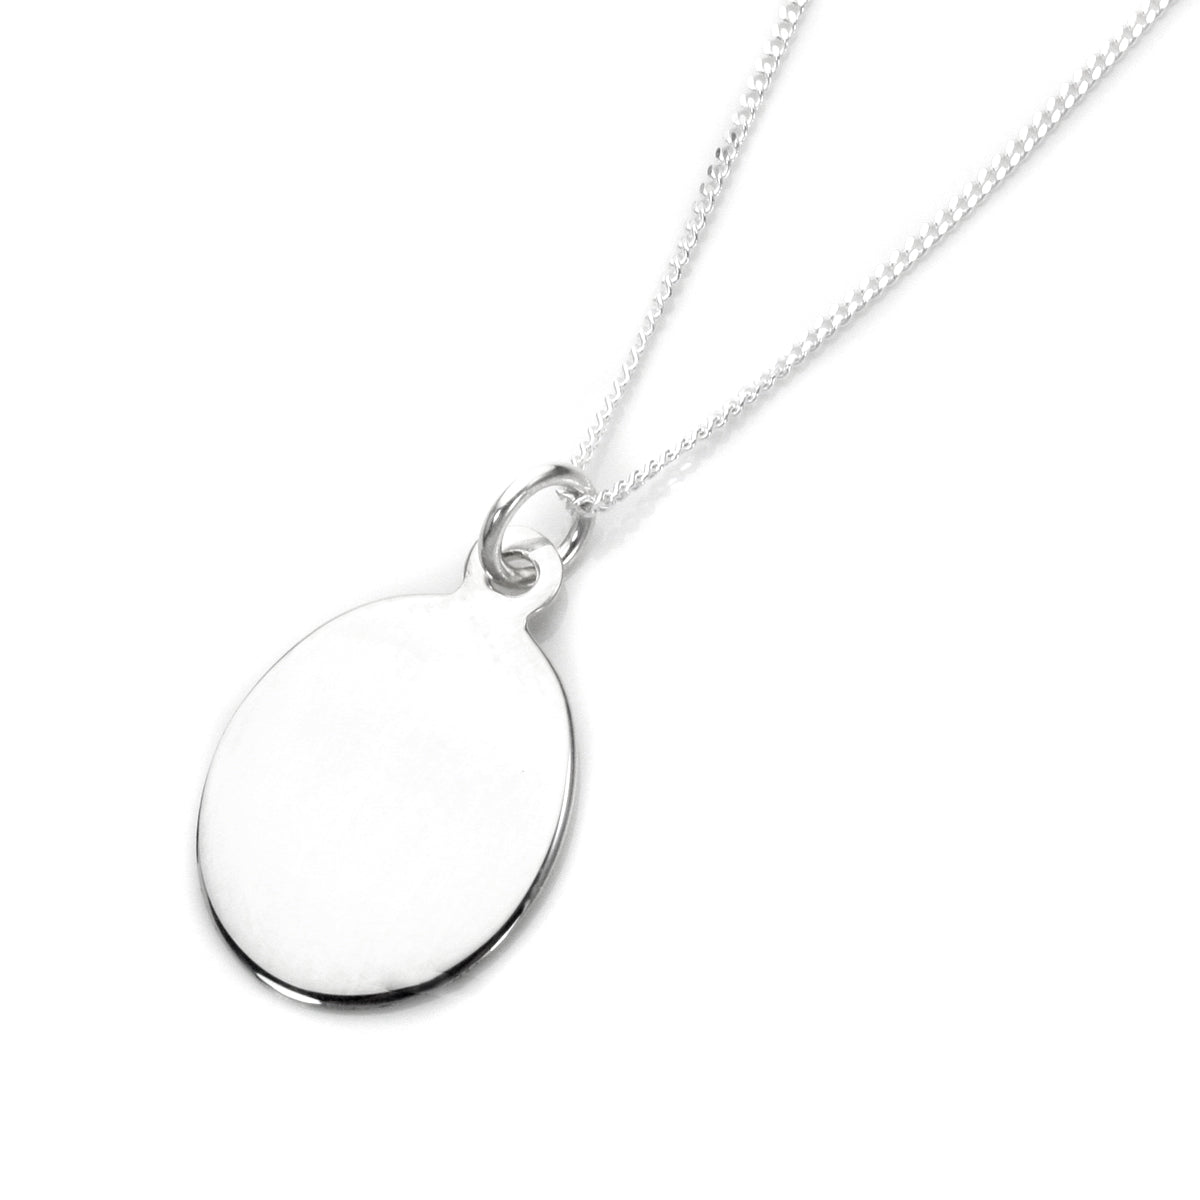 Sterling Silver Engravable Oval Pendant Necklace 14 - 32 Inches